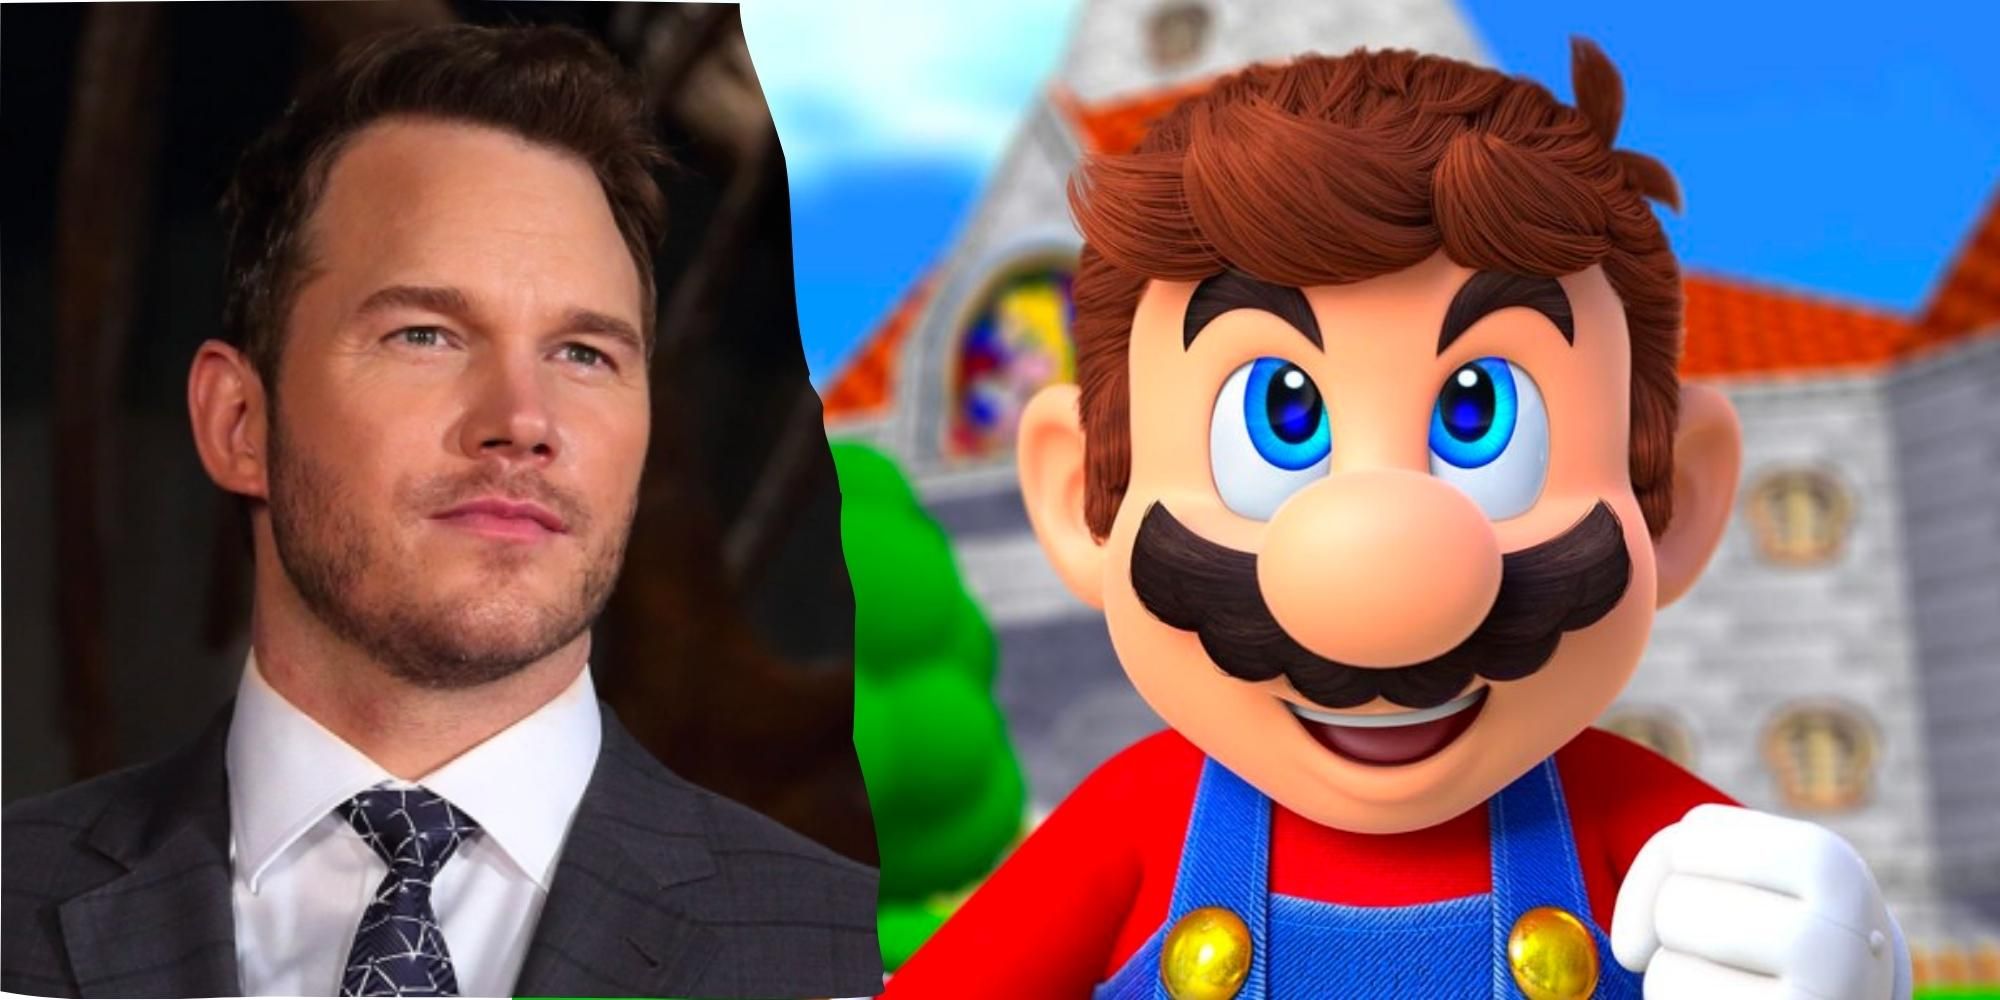 Chris Pratt next to Nintendo character Mario without his hat